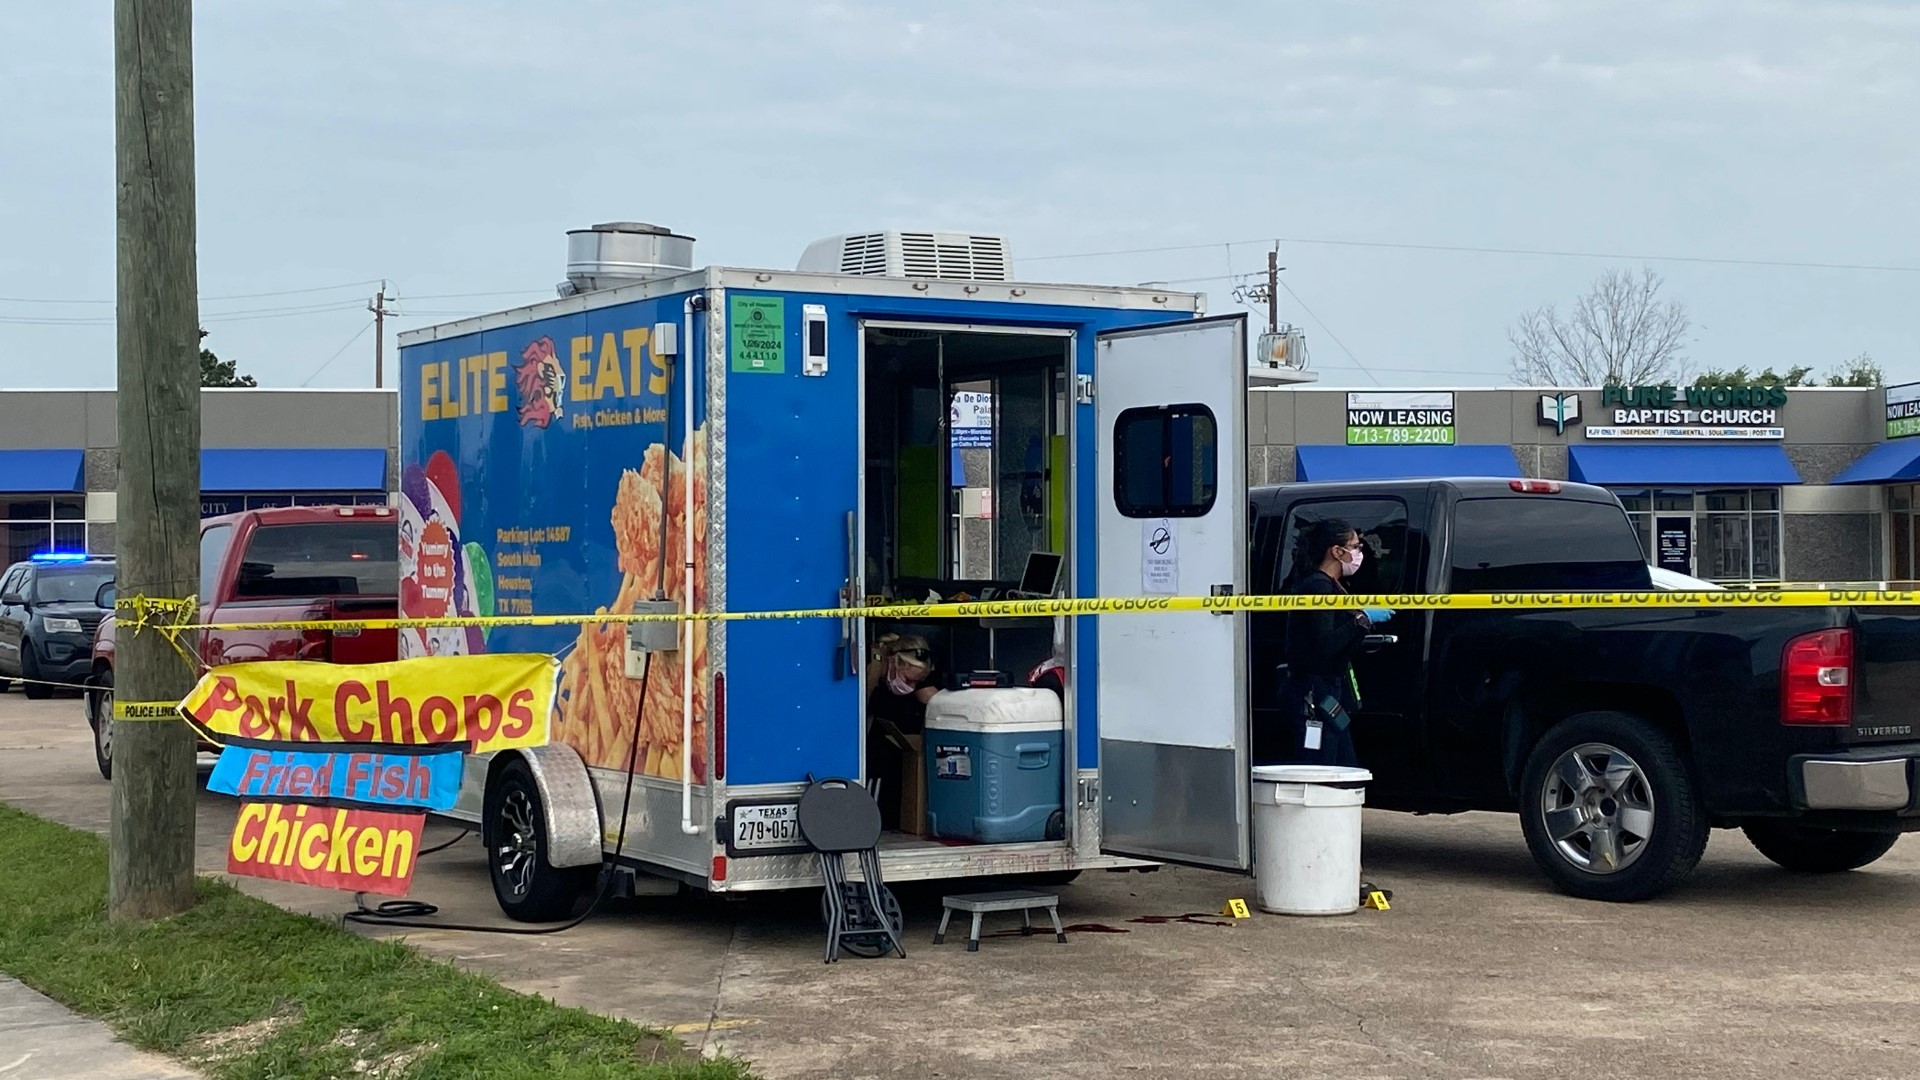 After shooting and killing a robber in what she called self-defense earlier in the week, a grandmother's family reopened their food truck on Friday.